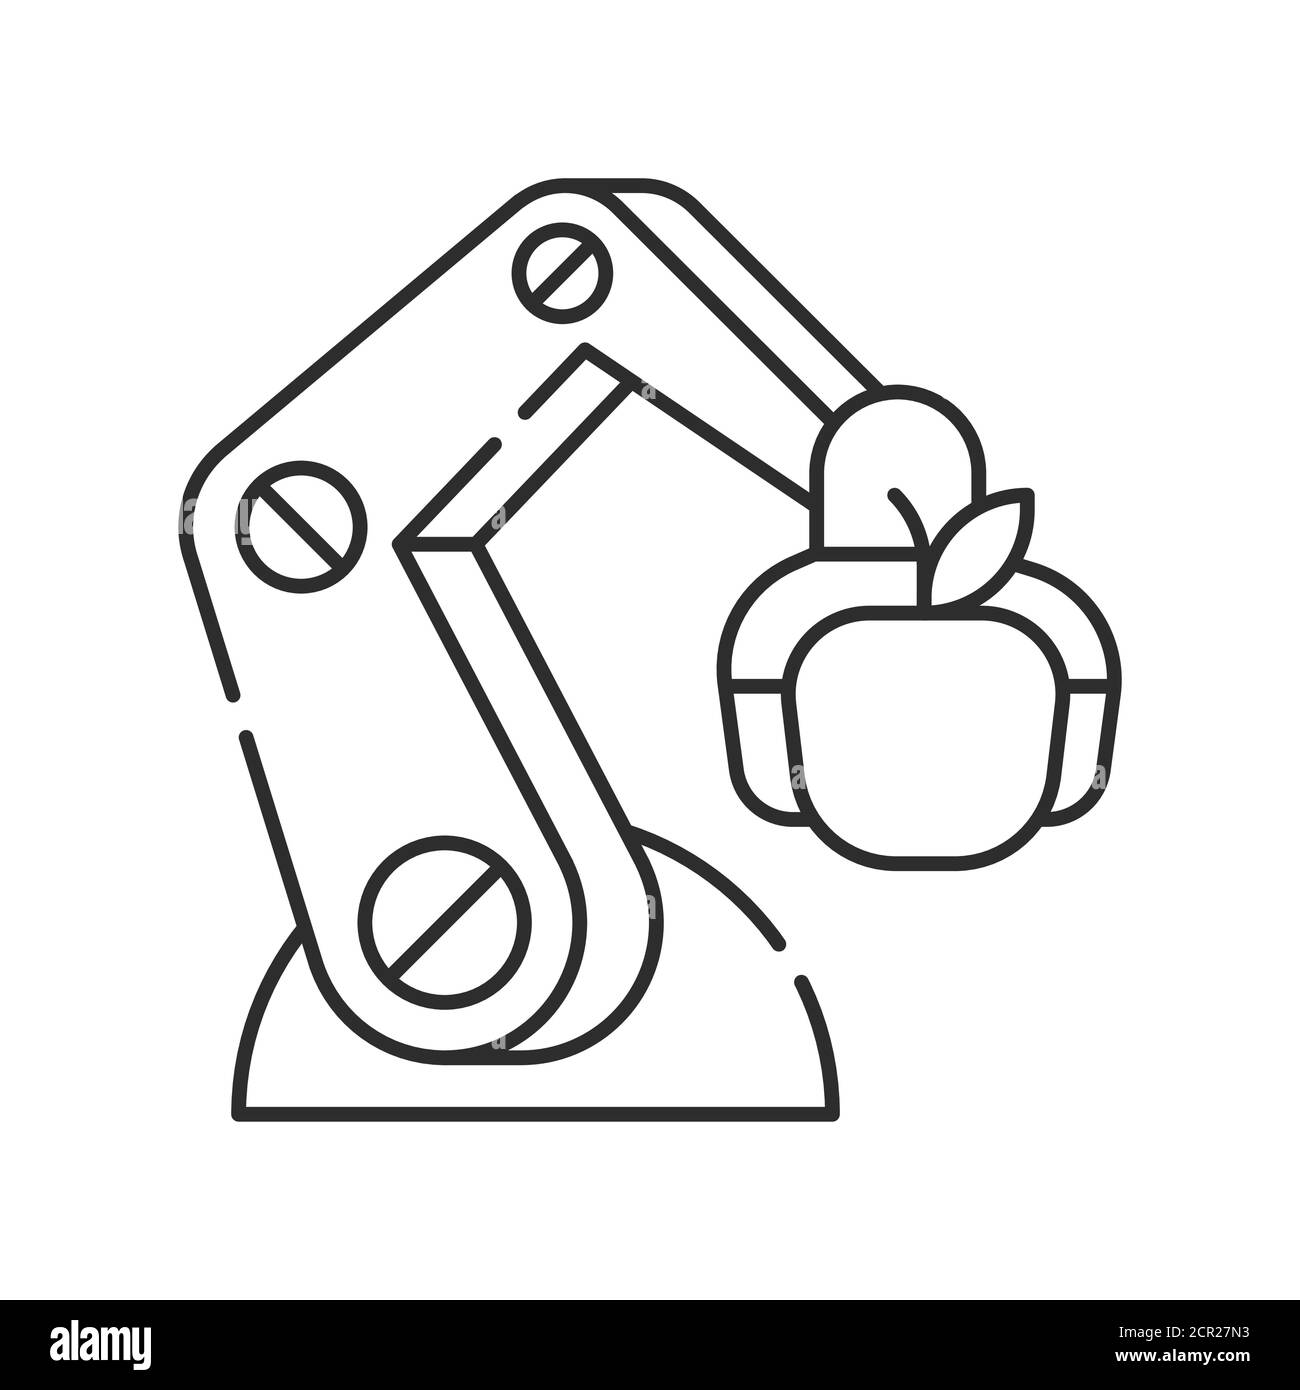 Smart robotic farmers analyze the growth and harvesting plants. Futuristic robot arm automation to increase efficiency black line icon. Agricultural Stock Vector